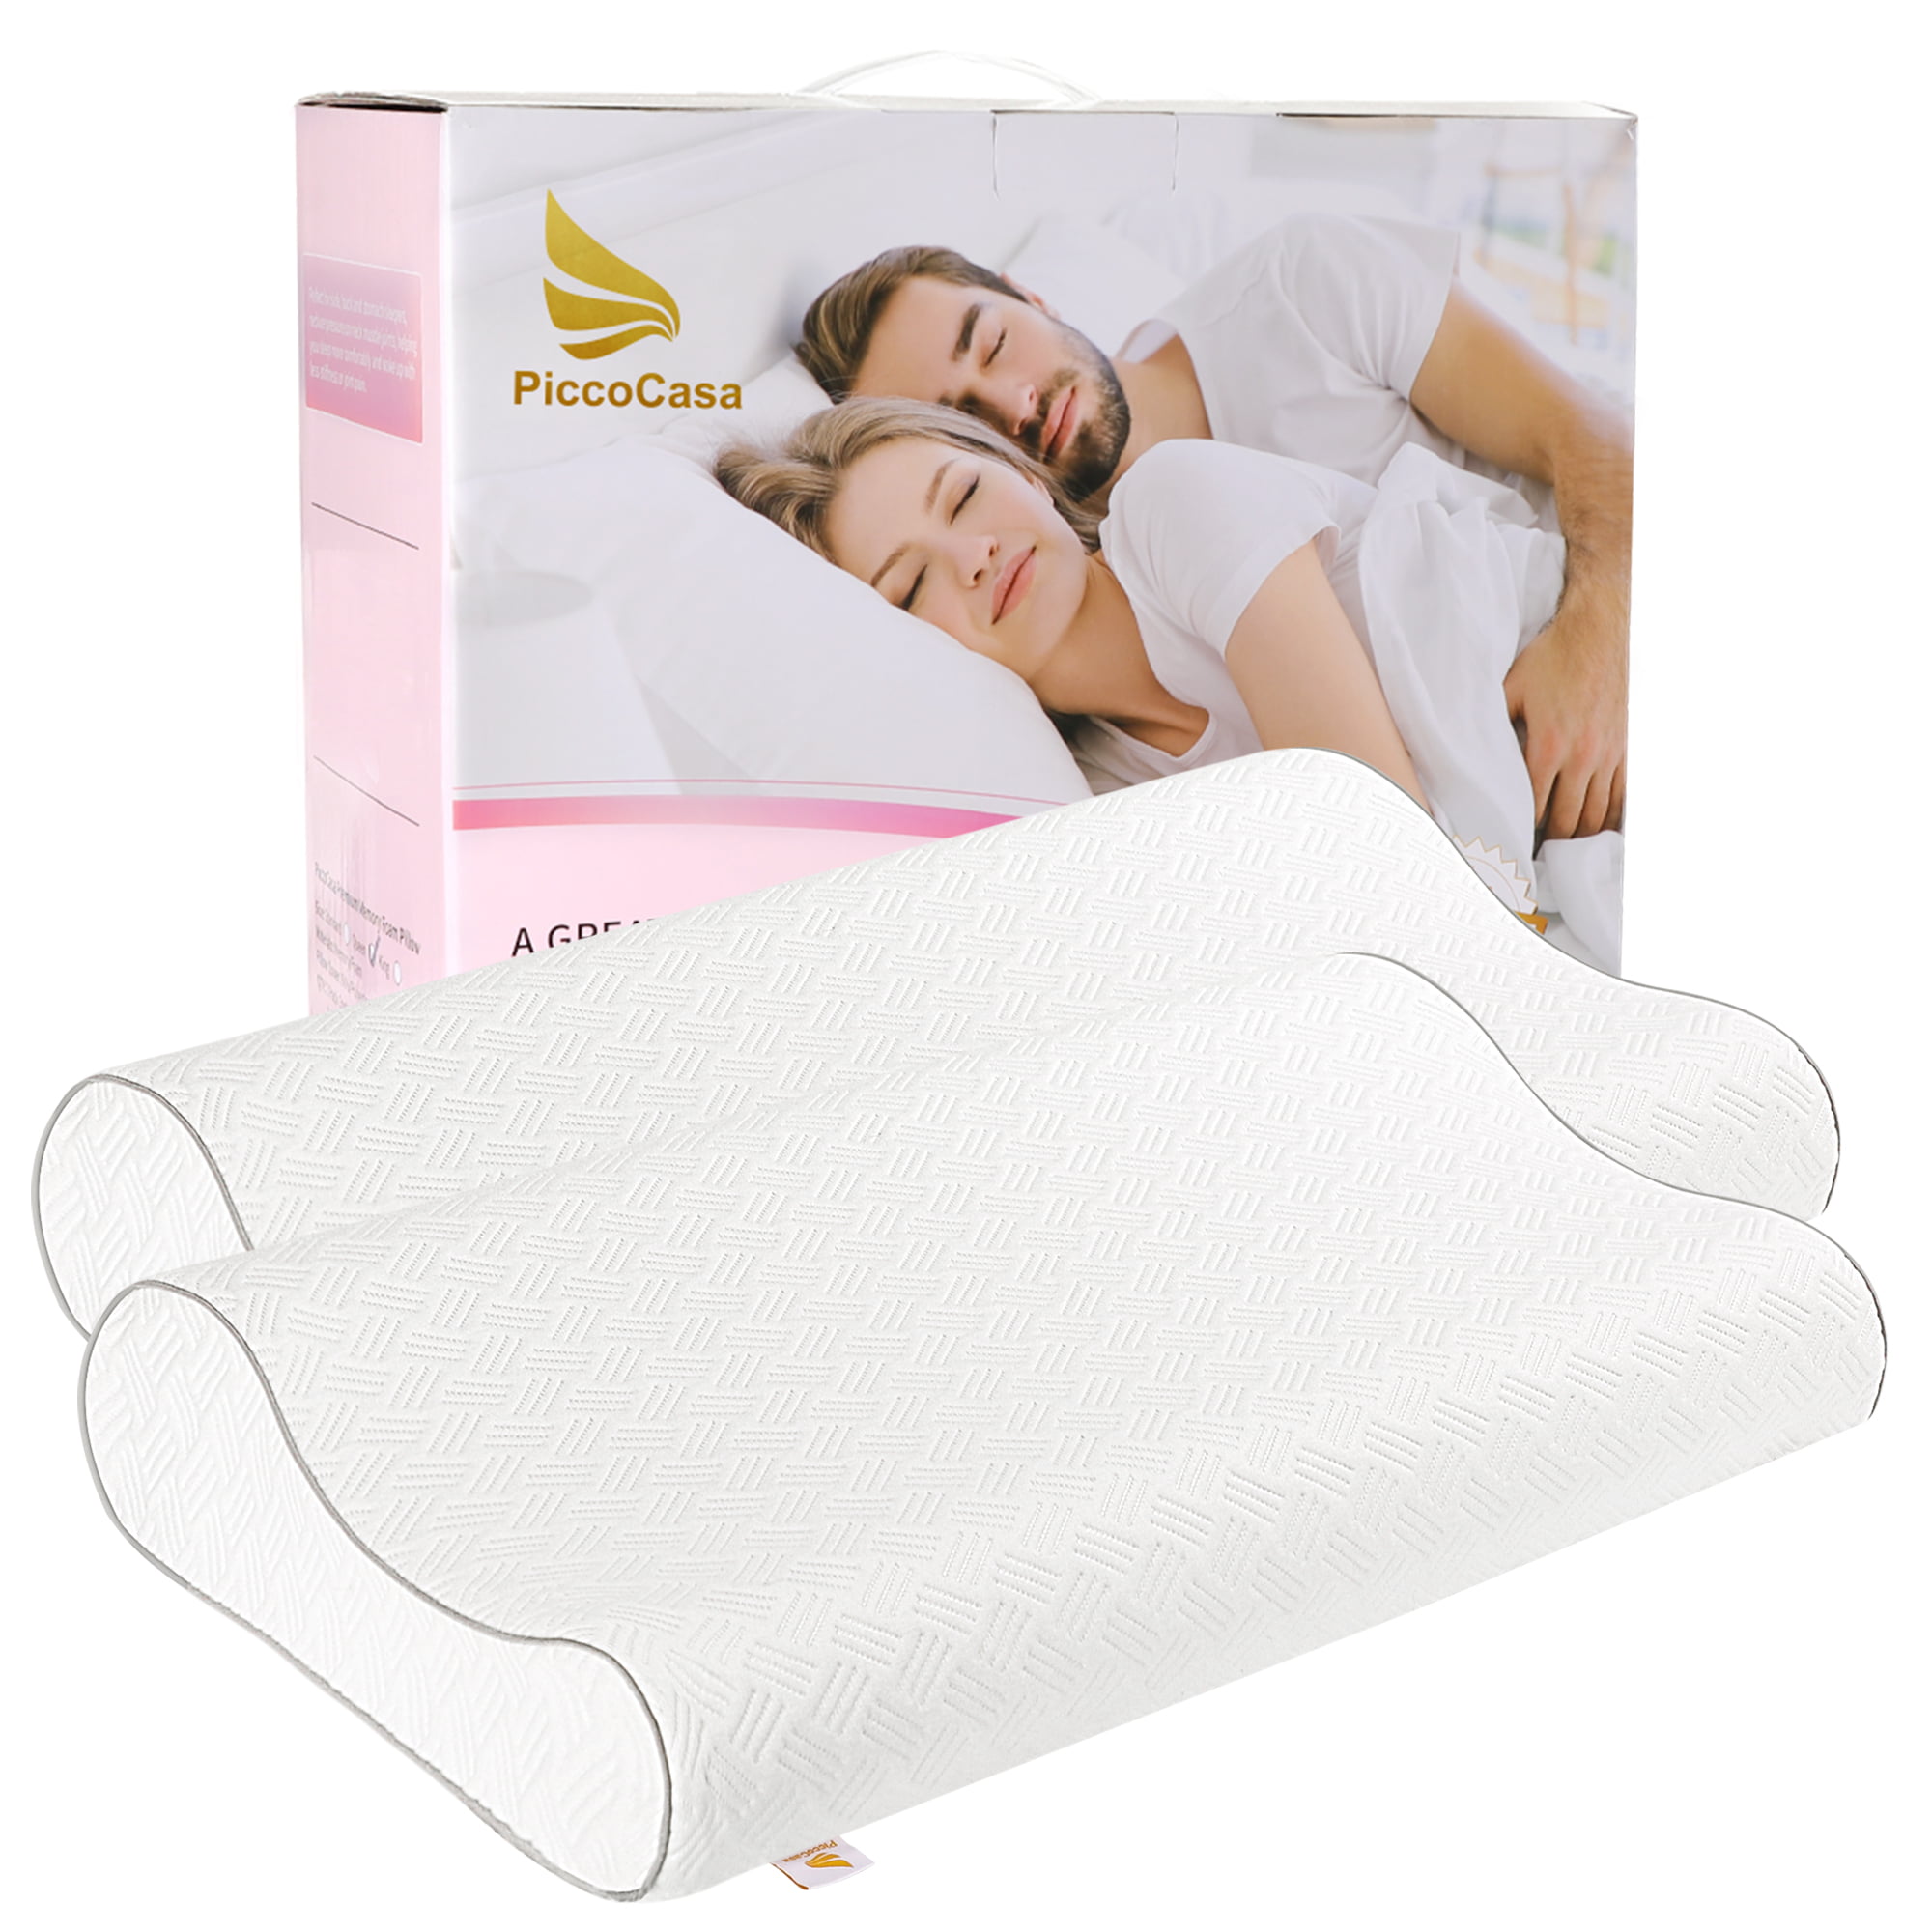 Hypoallergenic Ventilated Memory Foam Pillow with Premium Support 